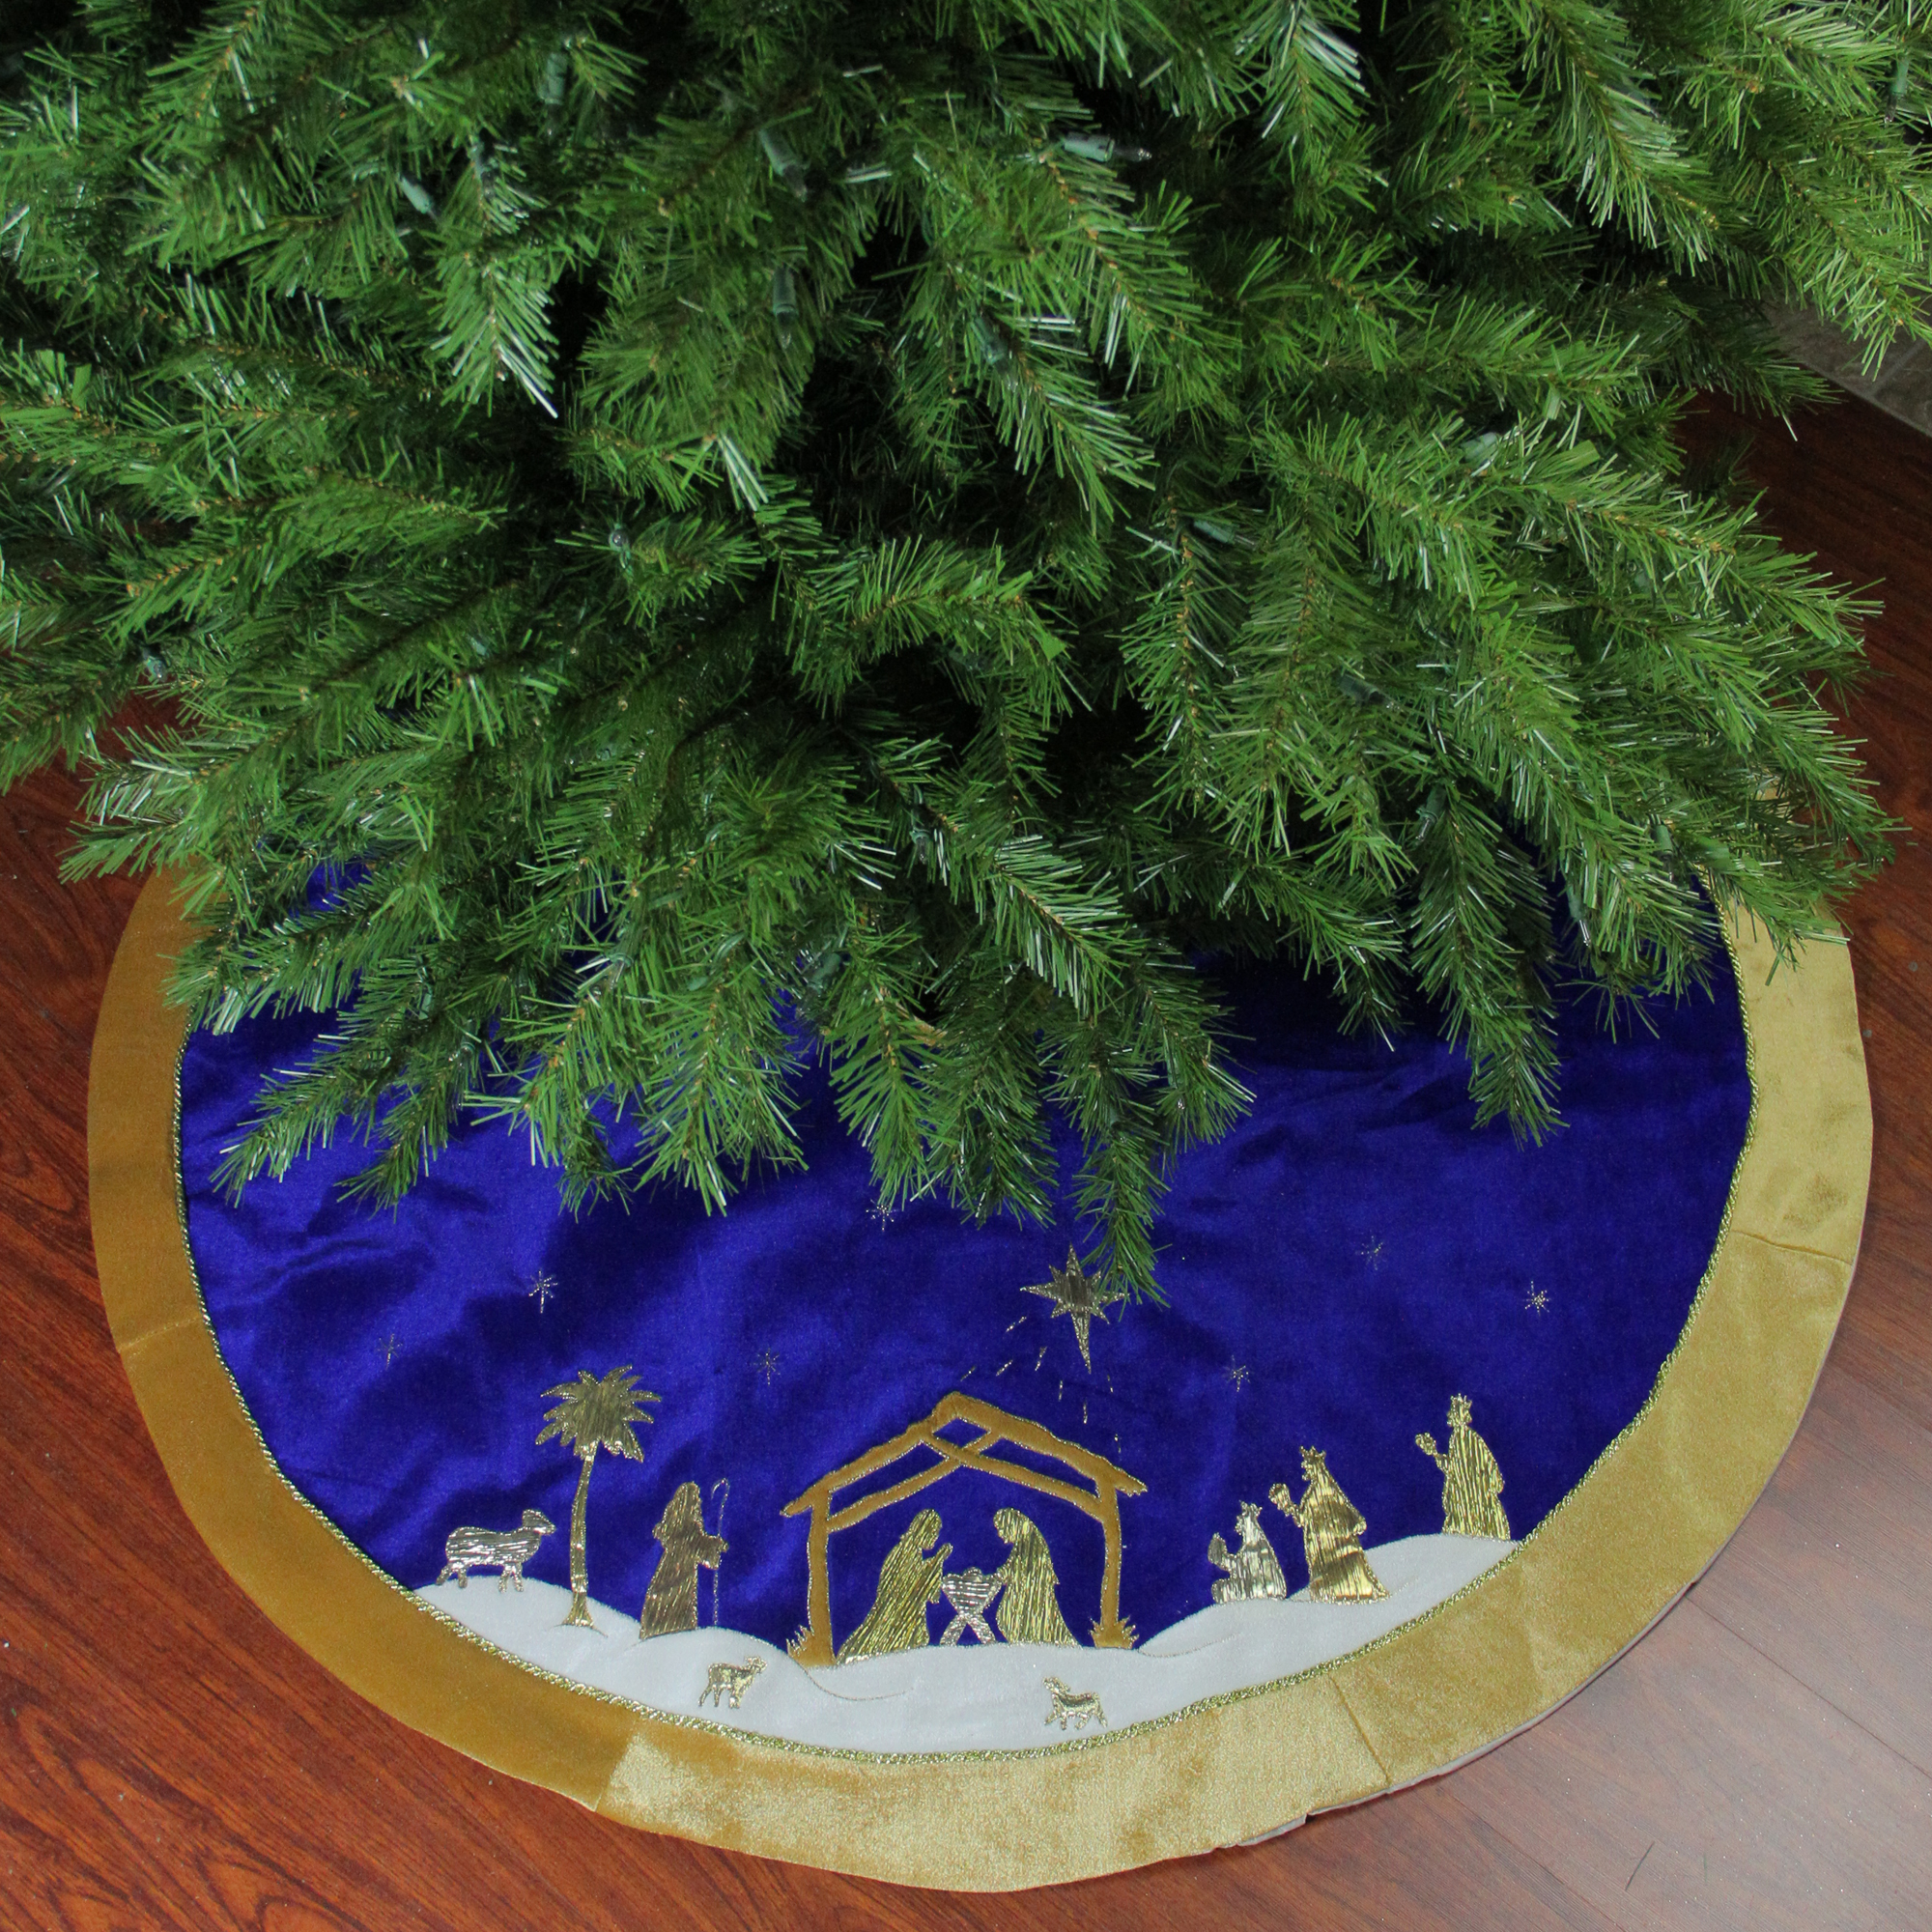 Northlight 48" Blue and Gold Nativity Scene Christmas Tree Skirt with Gold Border